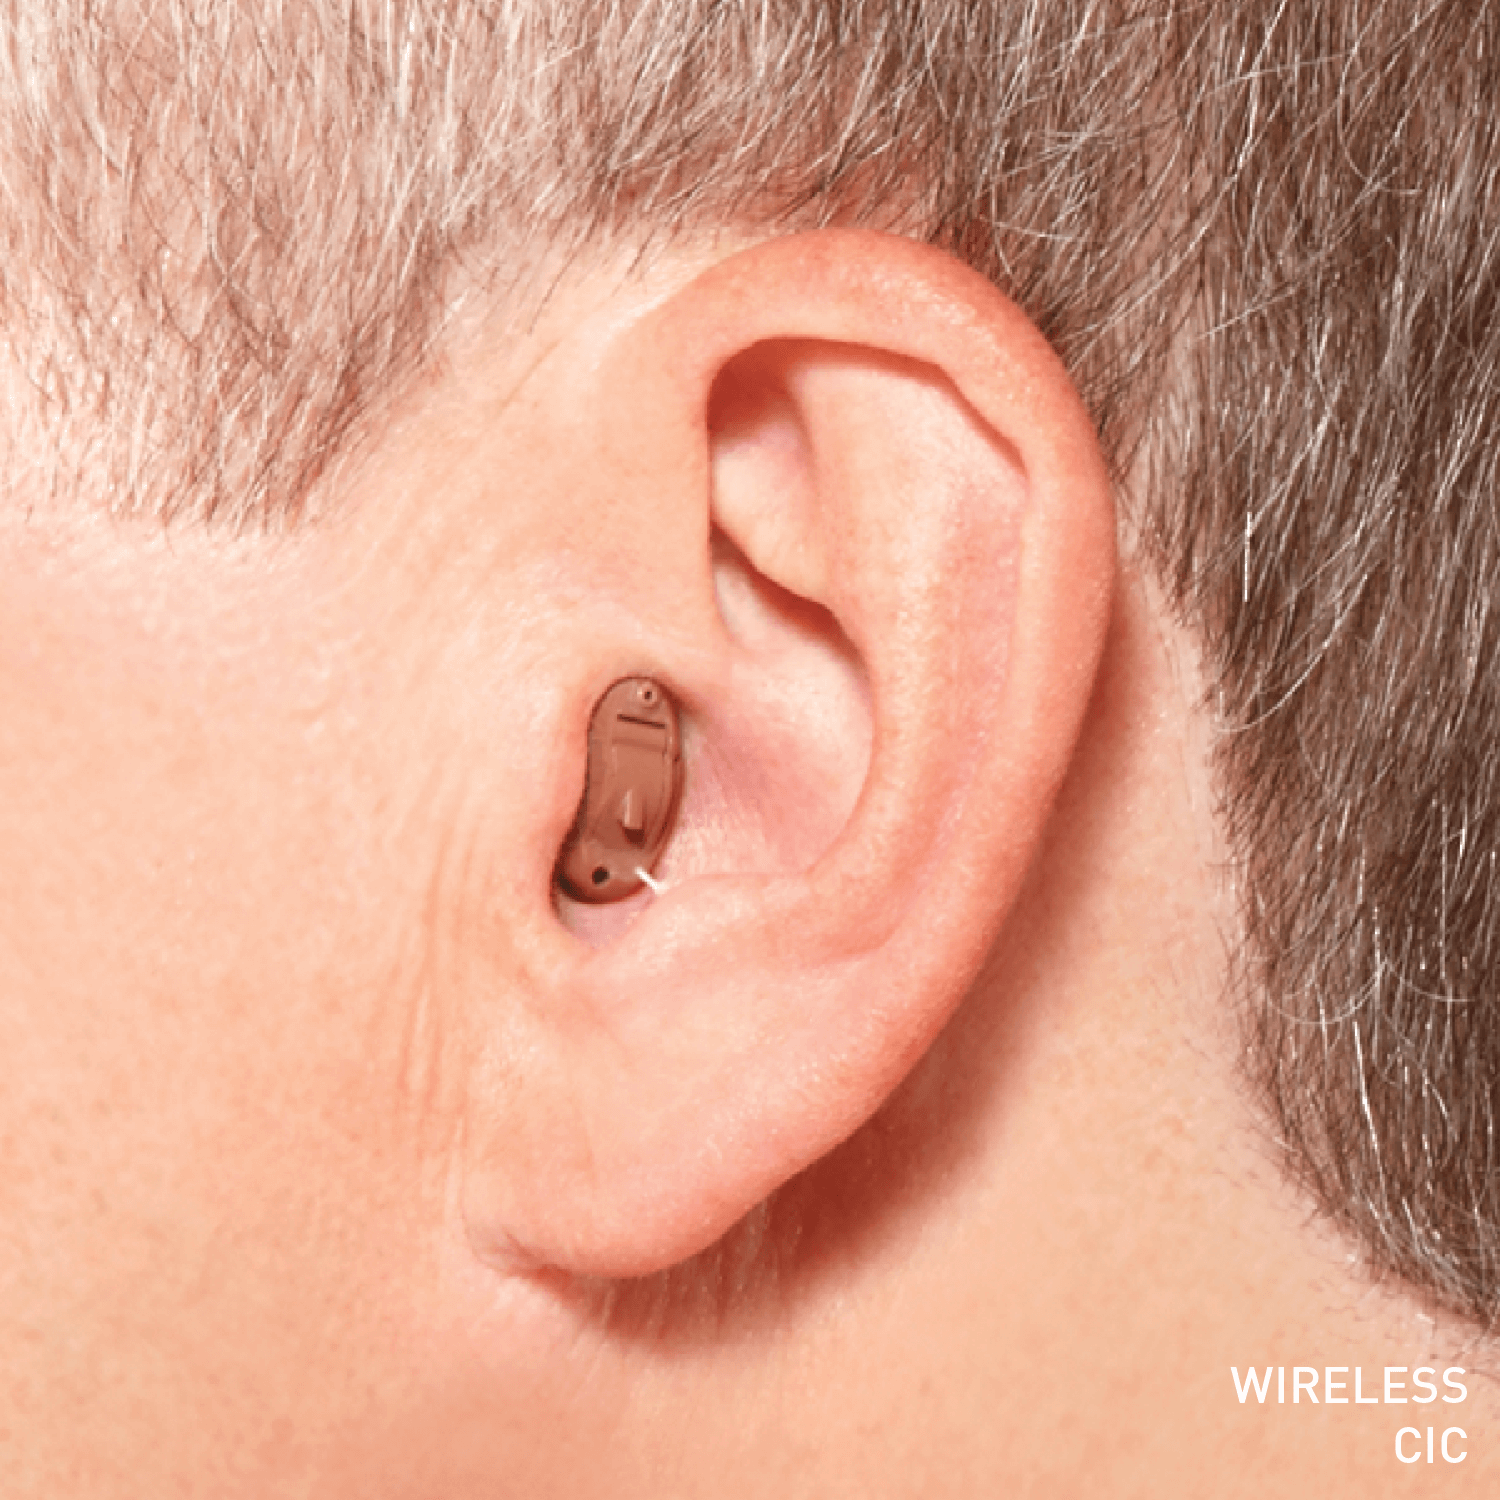 Man with CIC Hearing Aid in Ear